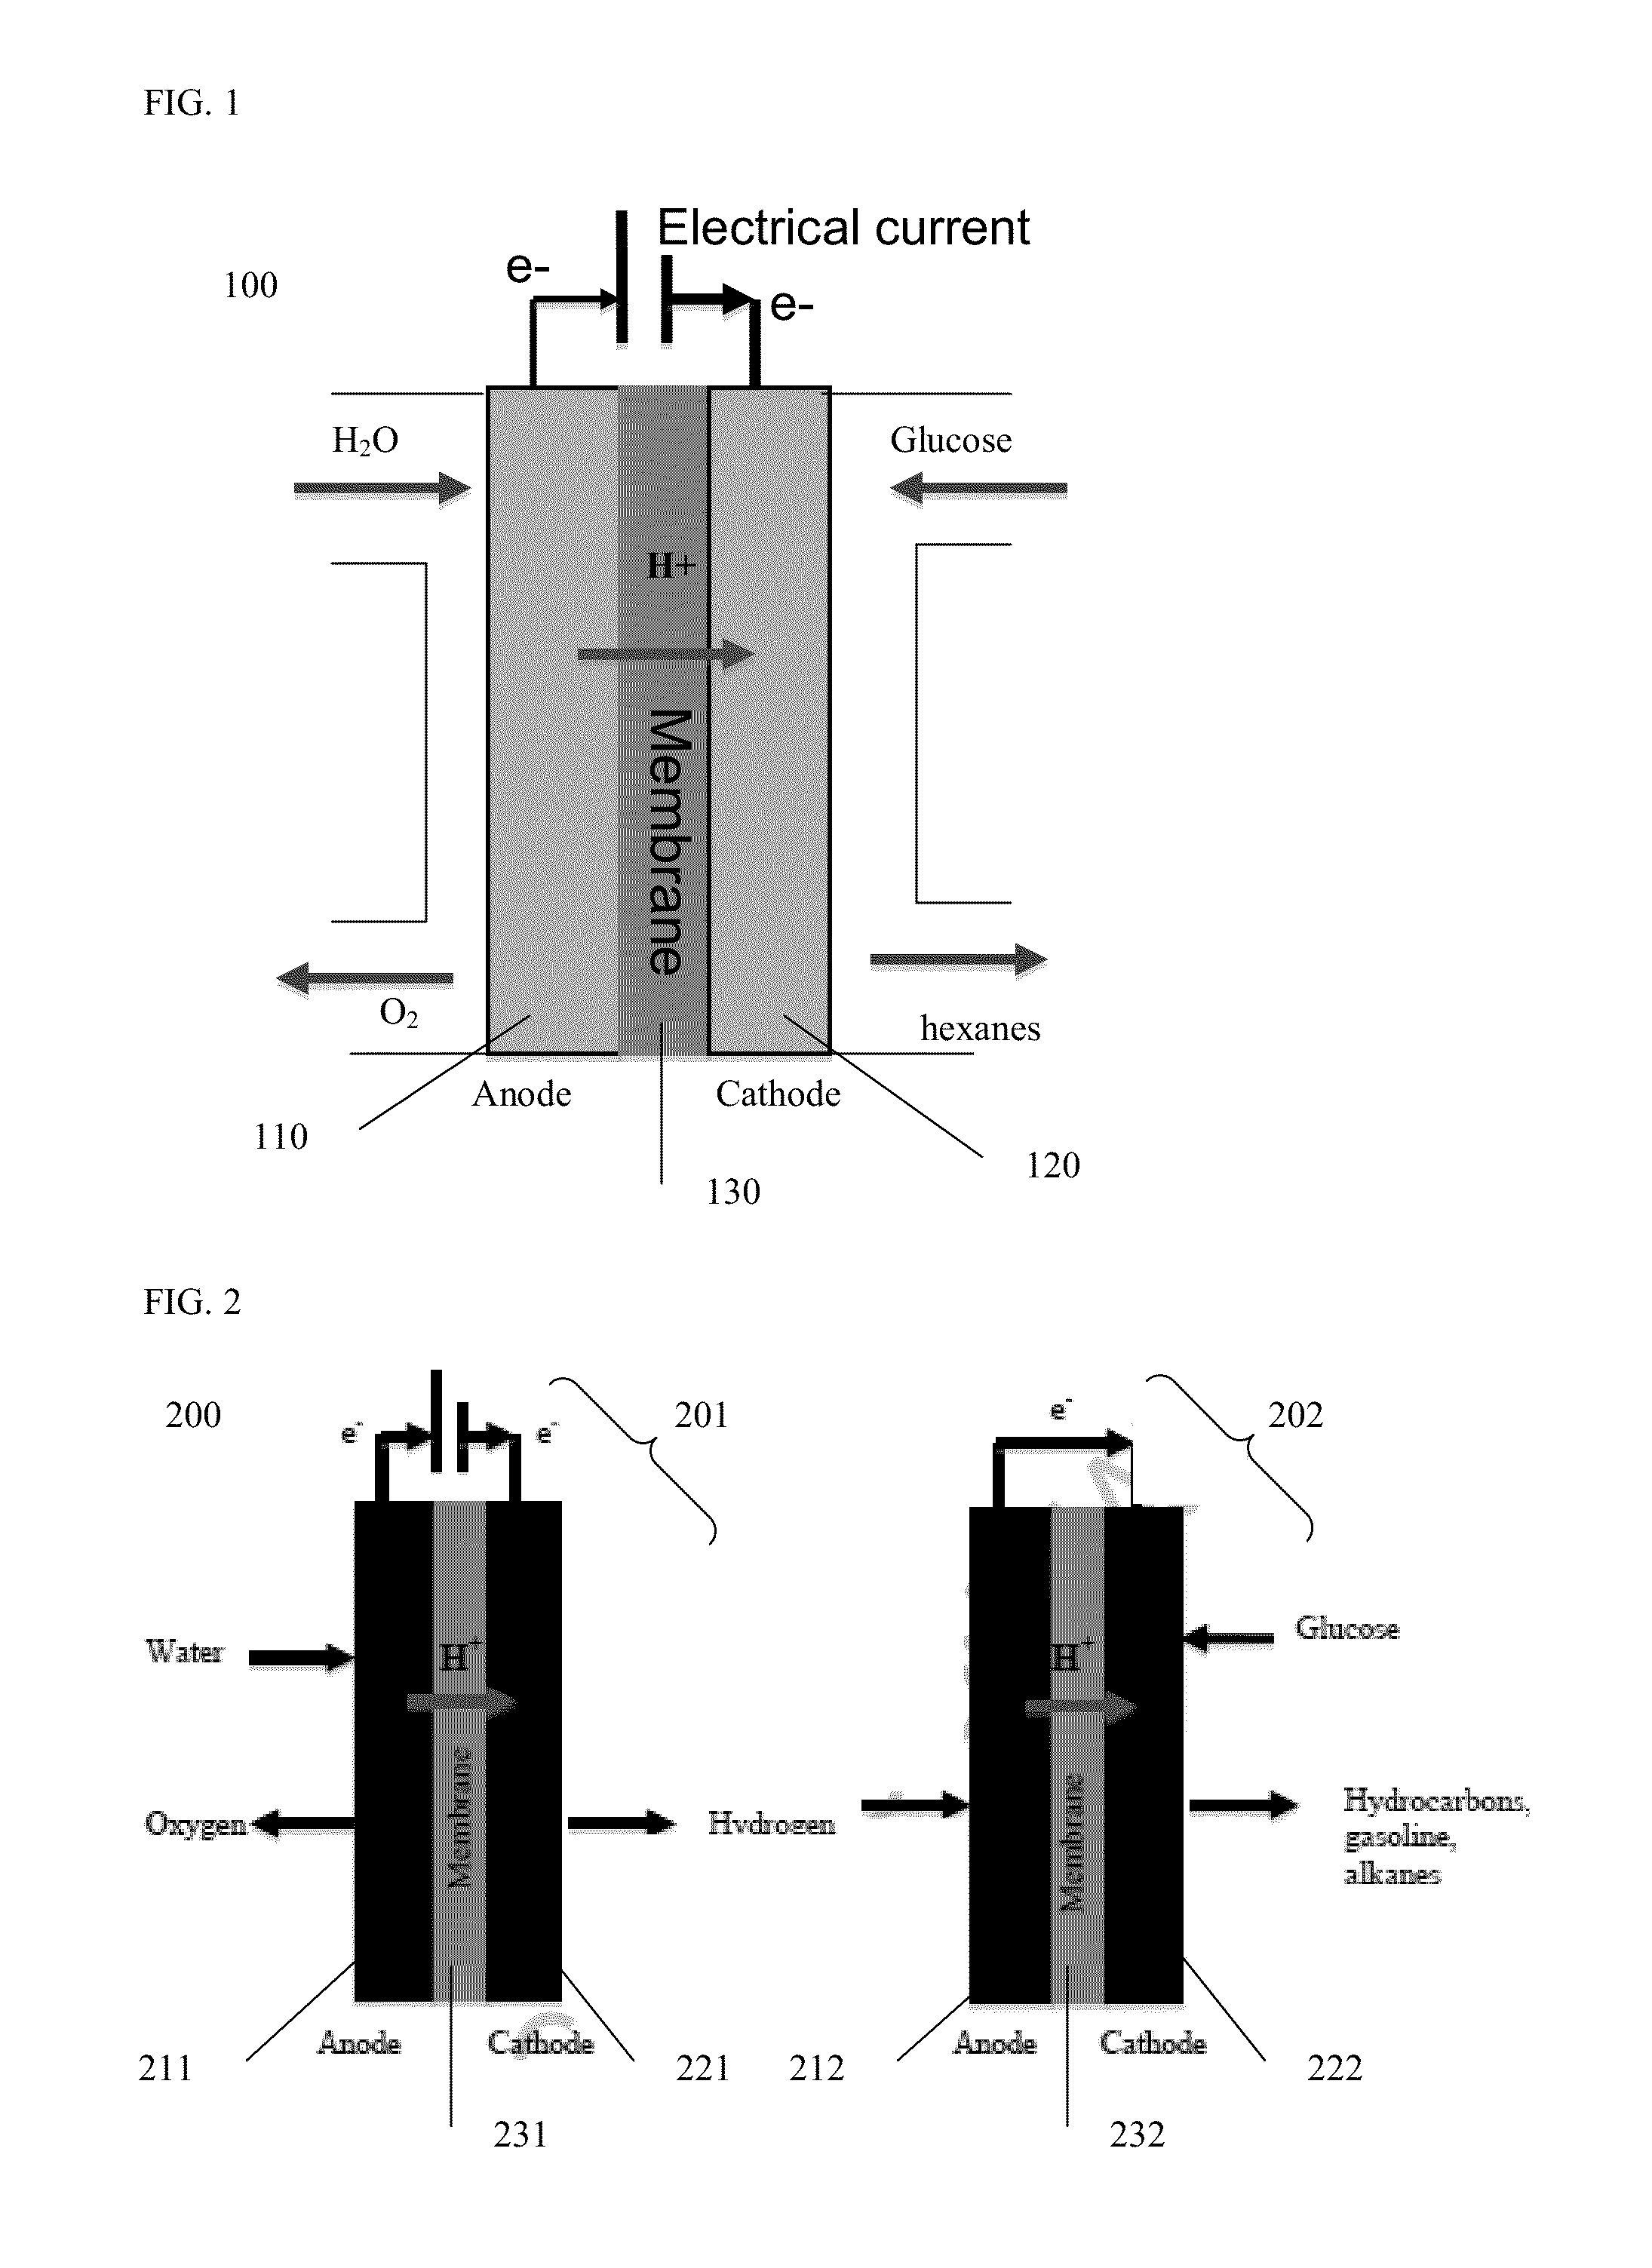 Method of producing hydrocarbons using a fuel cell, and fuel storage system comprising the fuel cell